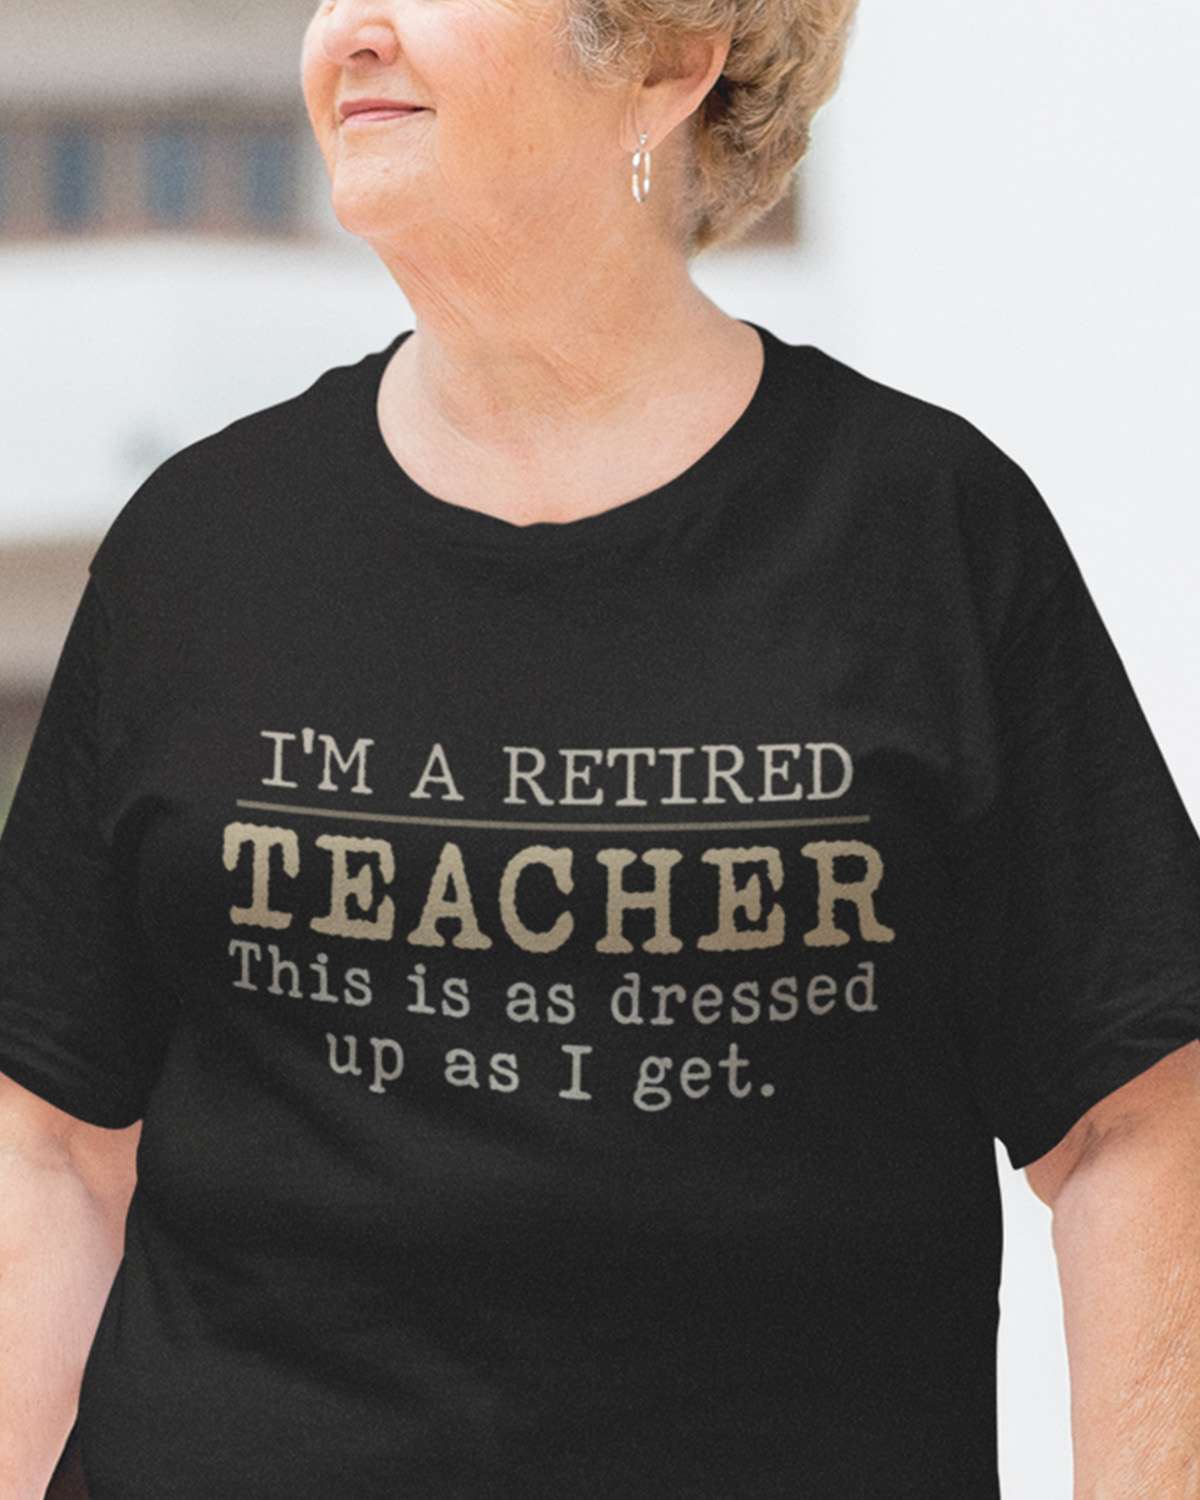 I'm a retired teacher this as dressed up as I get - Teacher the job